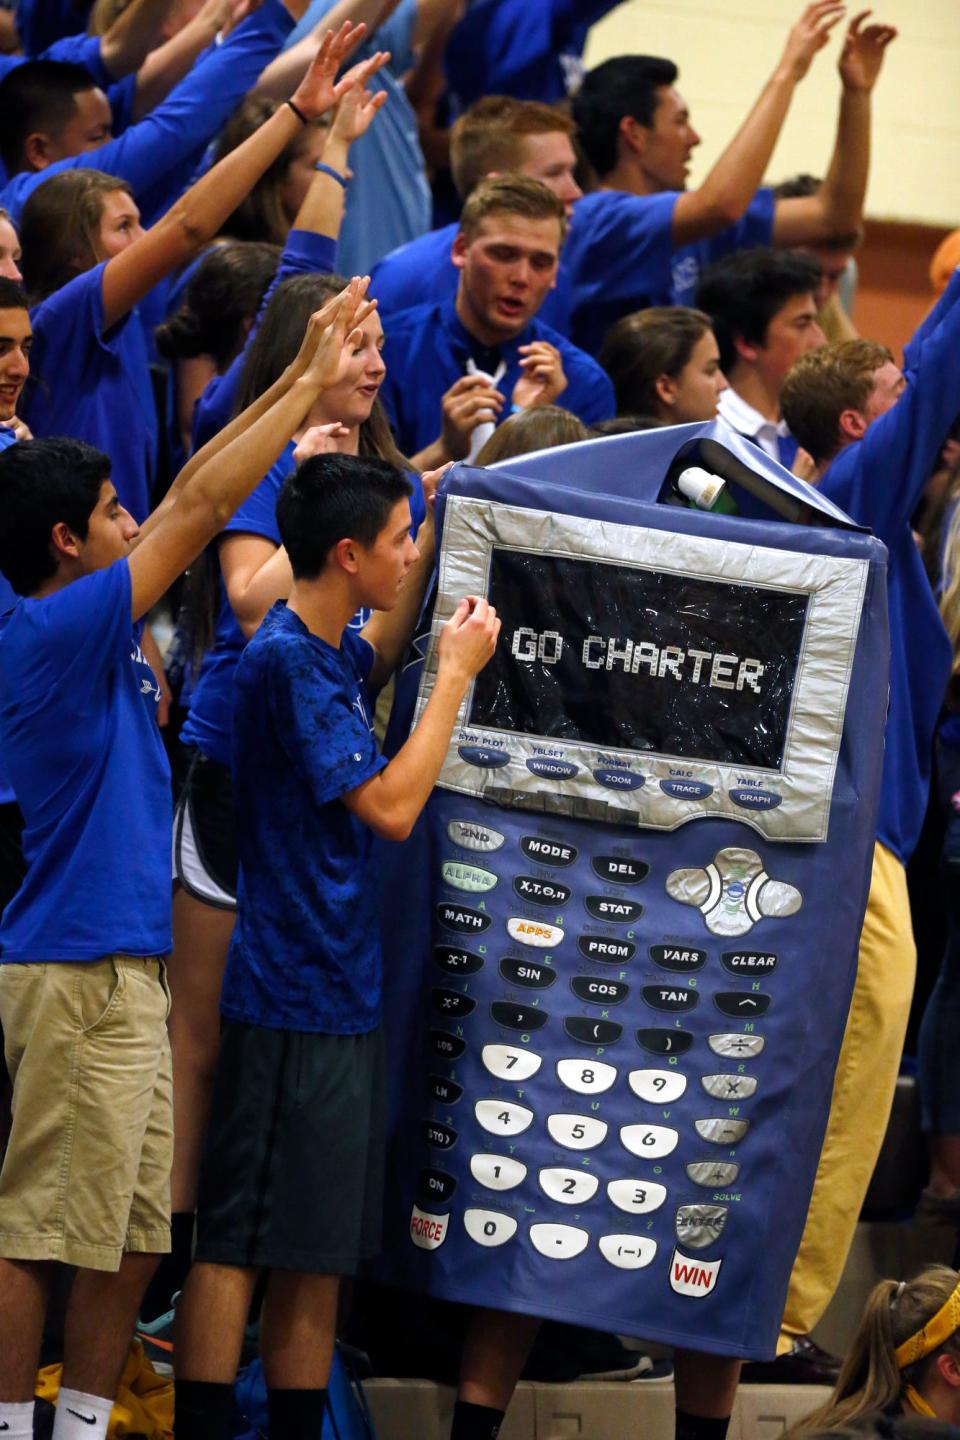 Charter of Wilmington's calculator mascot really doesn't have anything to do with Force, but it is cool.